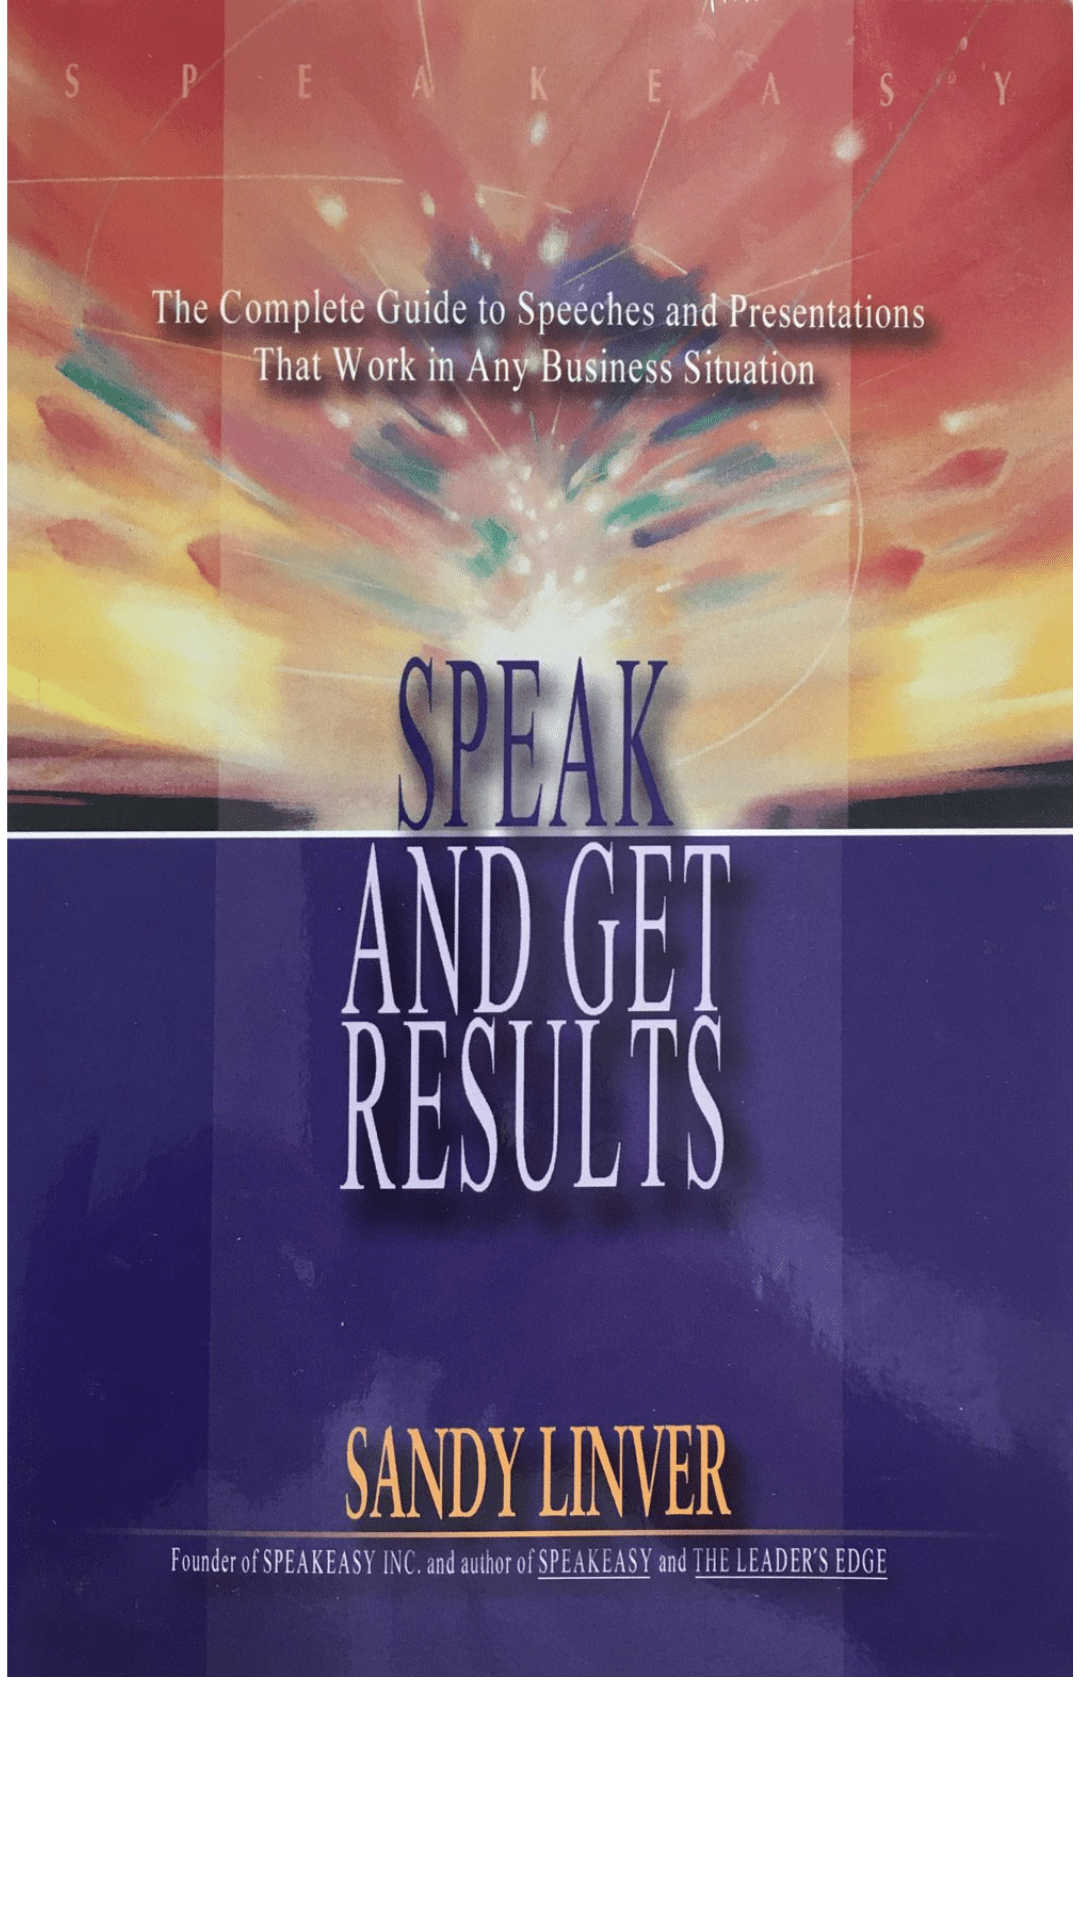 Speak and Get Results by Sandy Linver